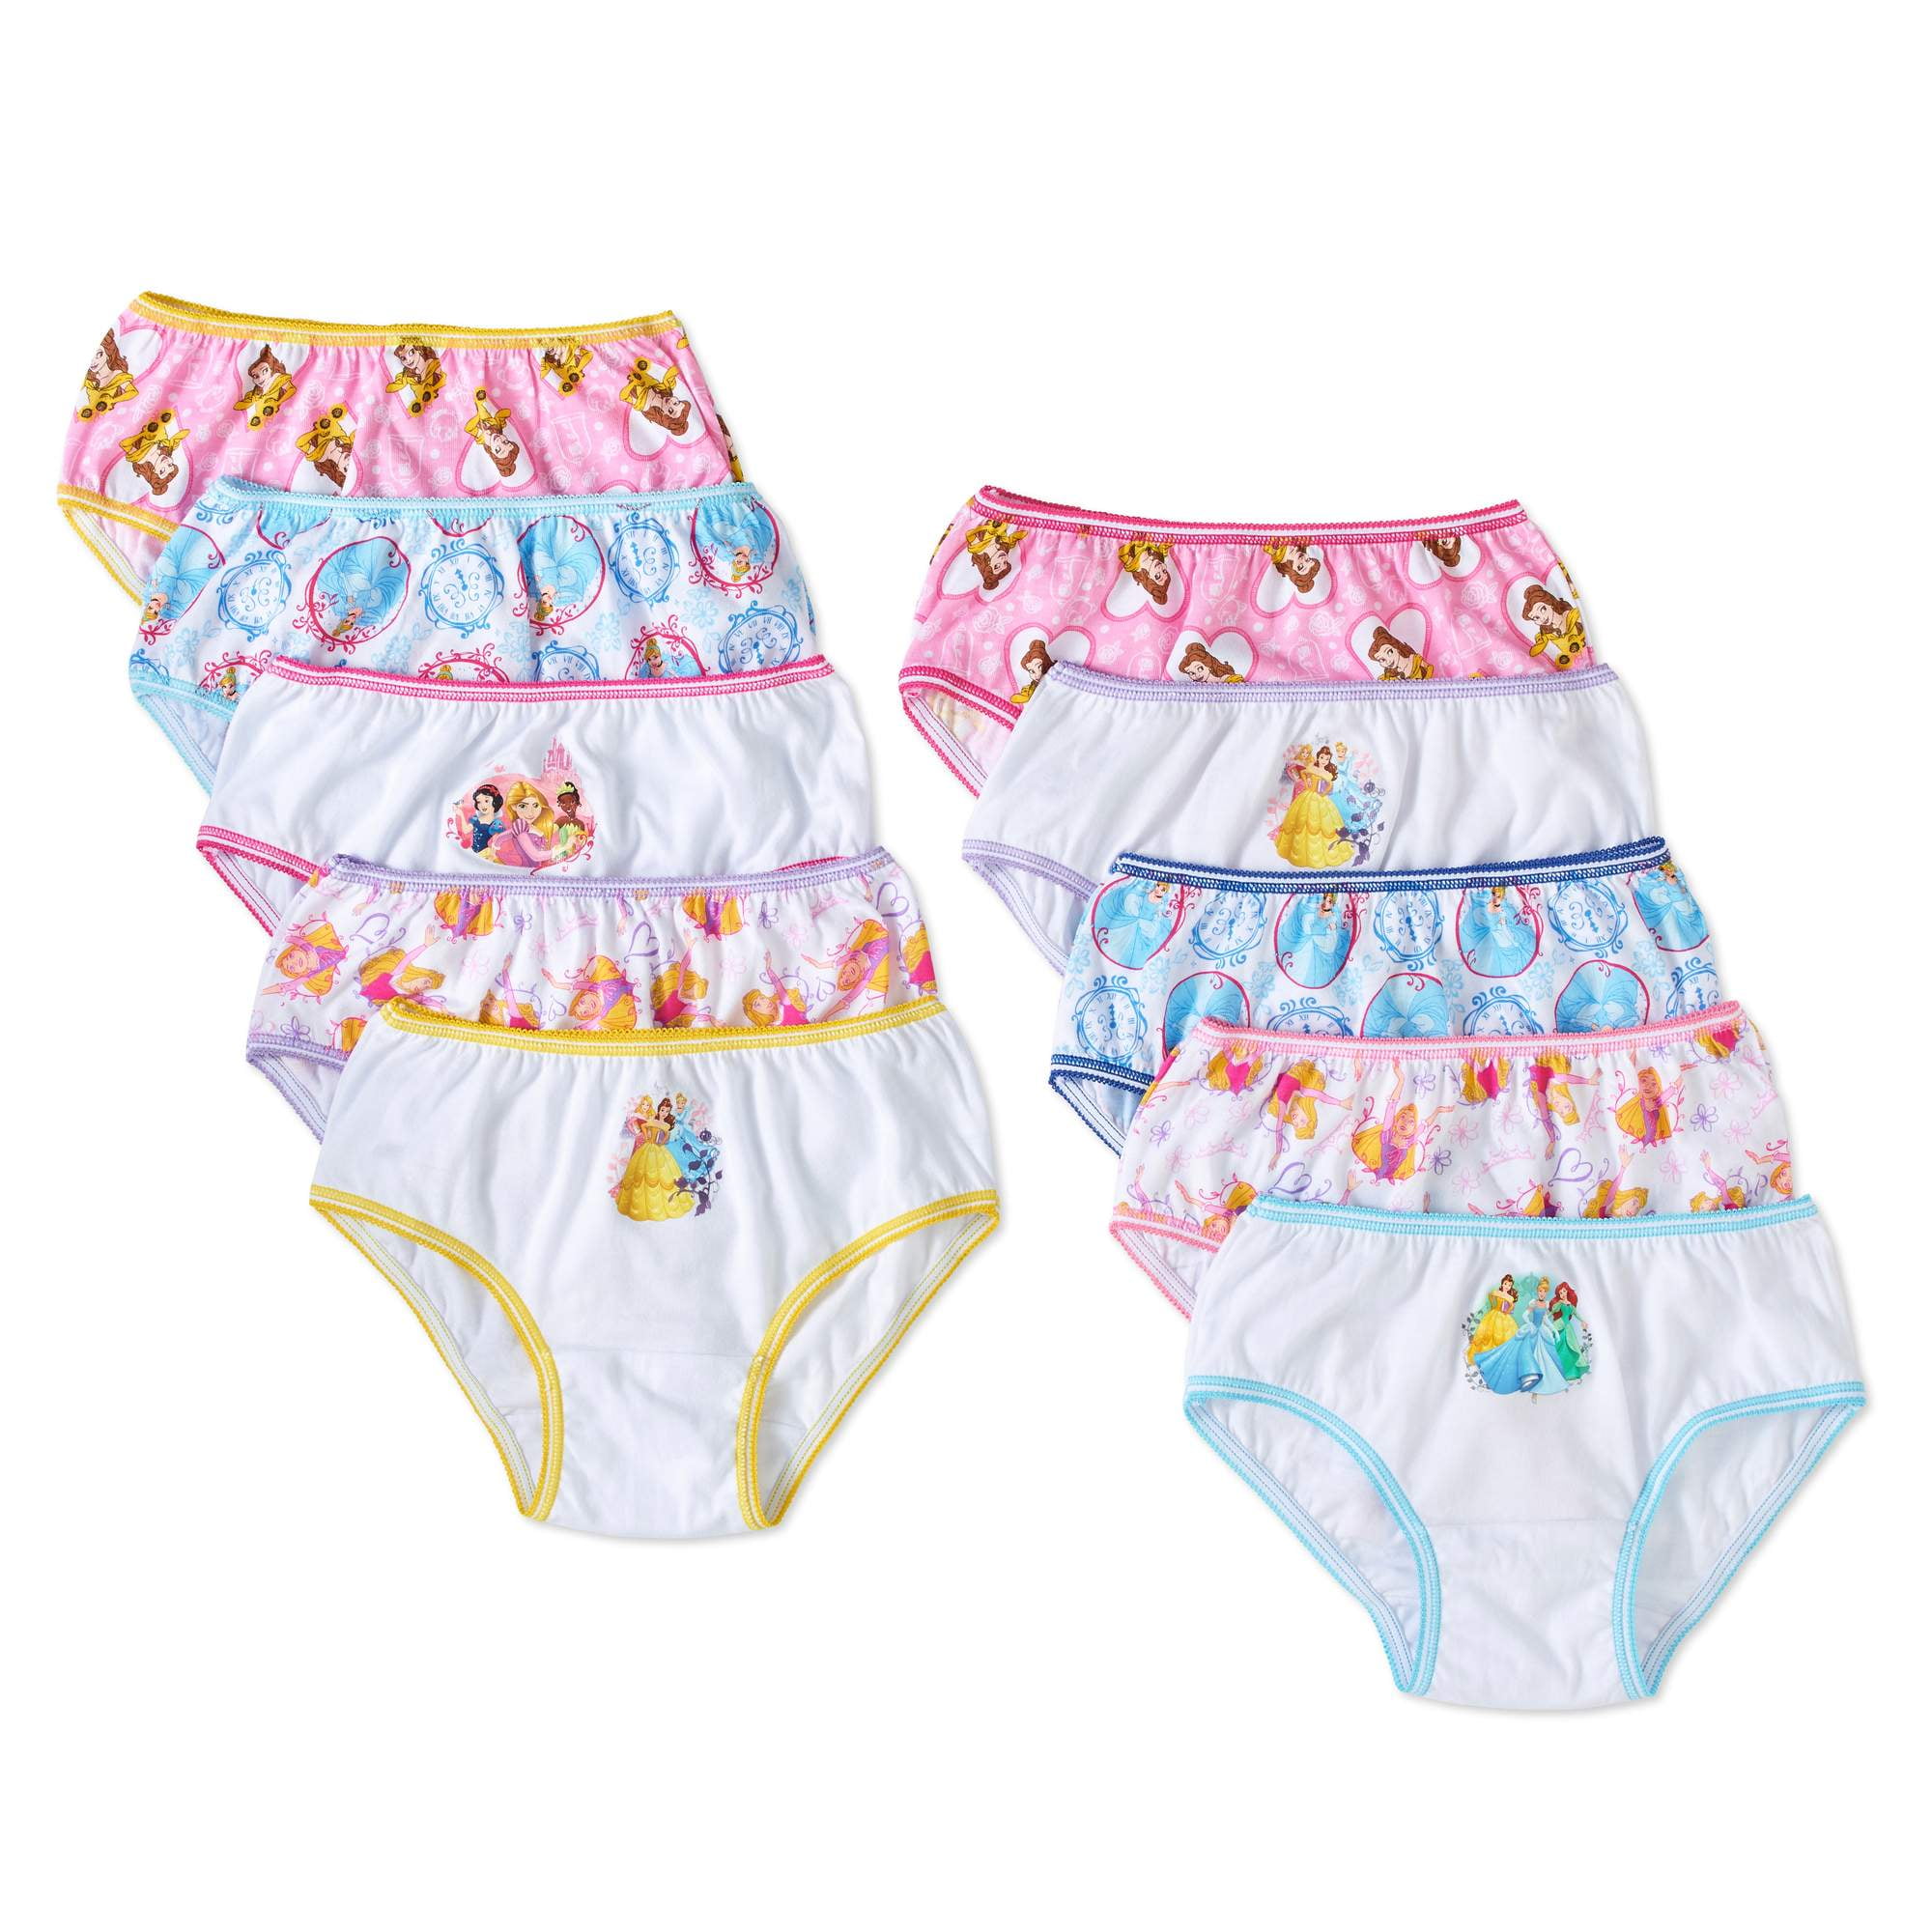 Disney Girls' Big Princess Panty Multipacks with Favorites Cinderella,  Belle, Ariel and More in Sizes 2/3t, 4t, 4, 6, 8